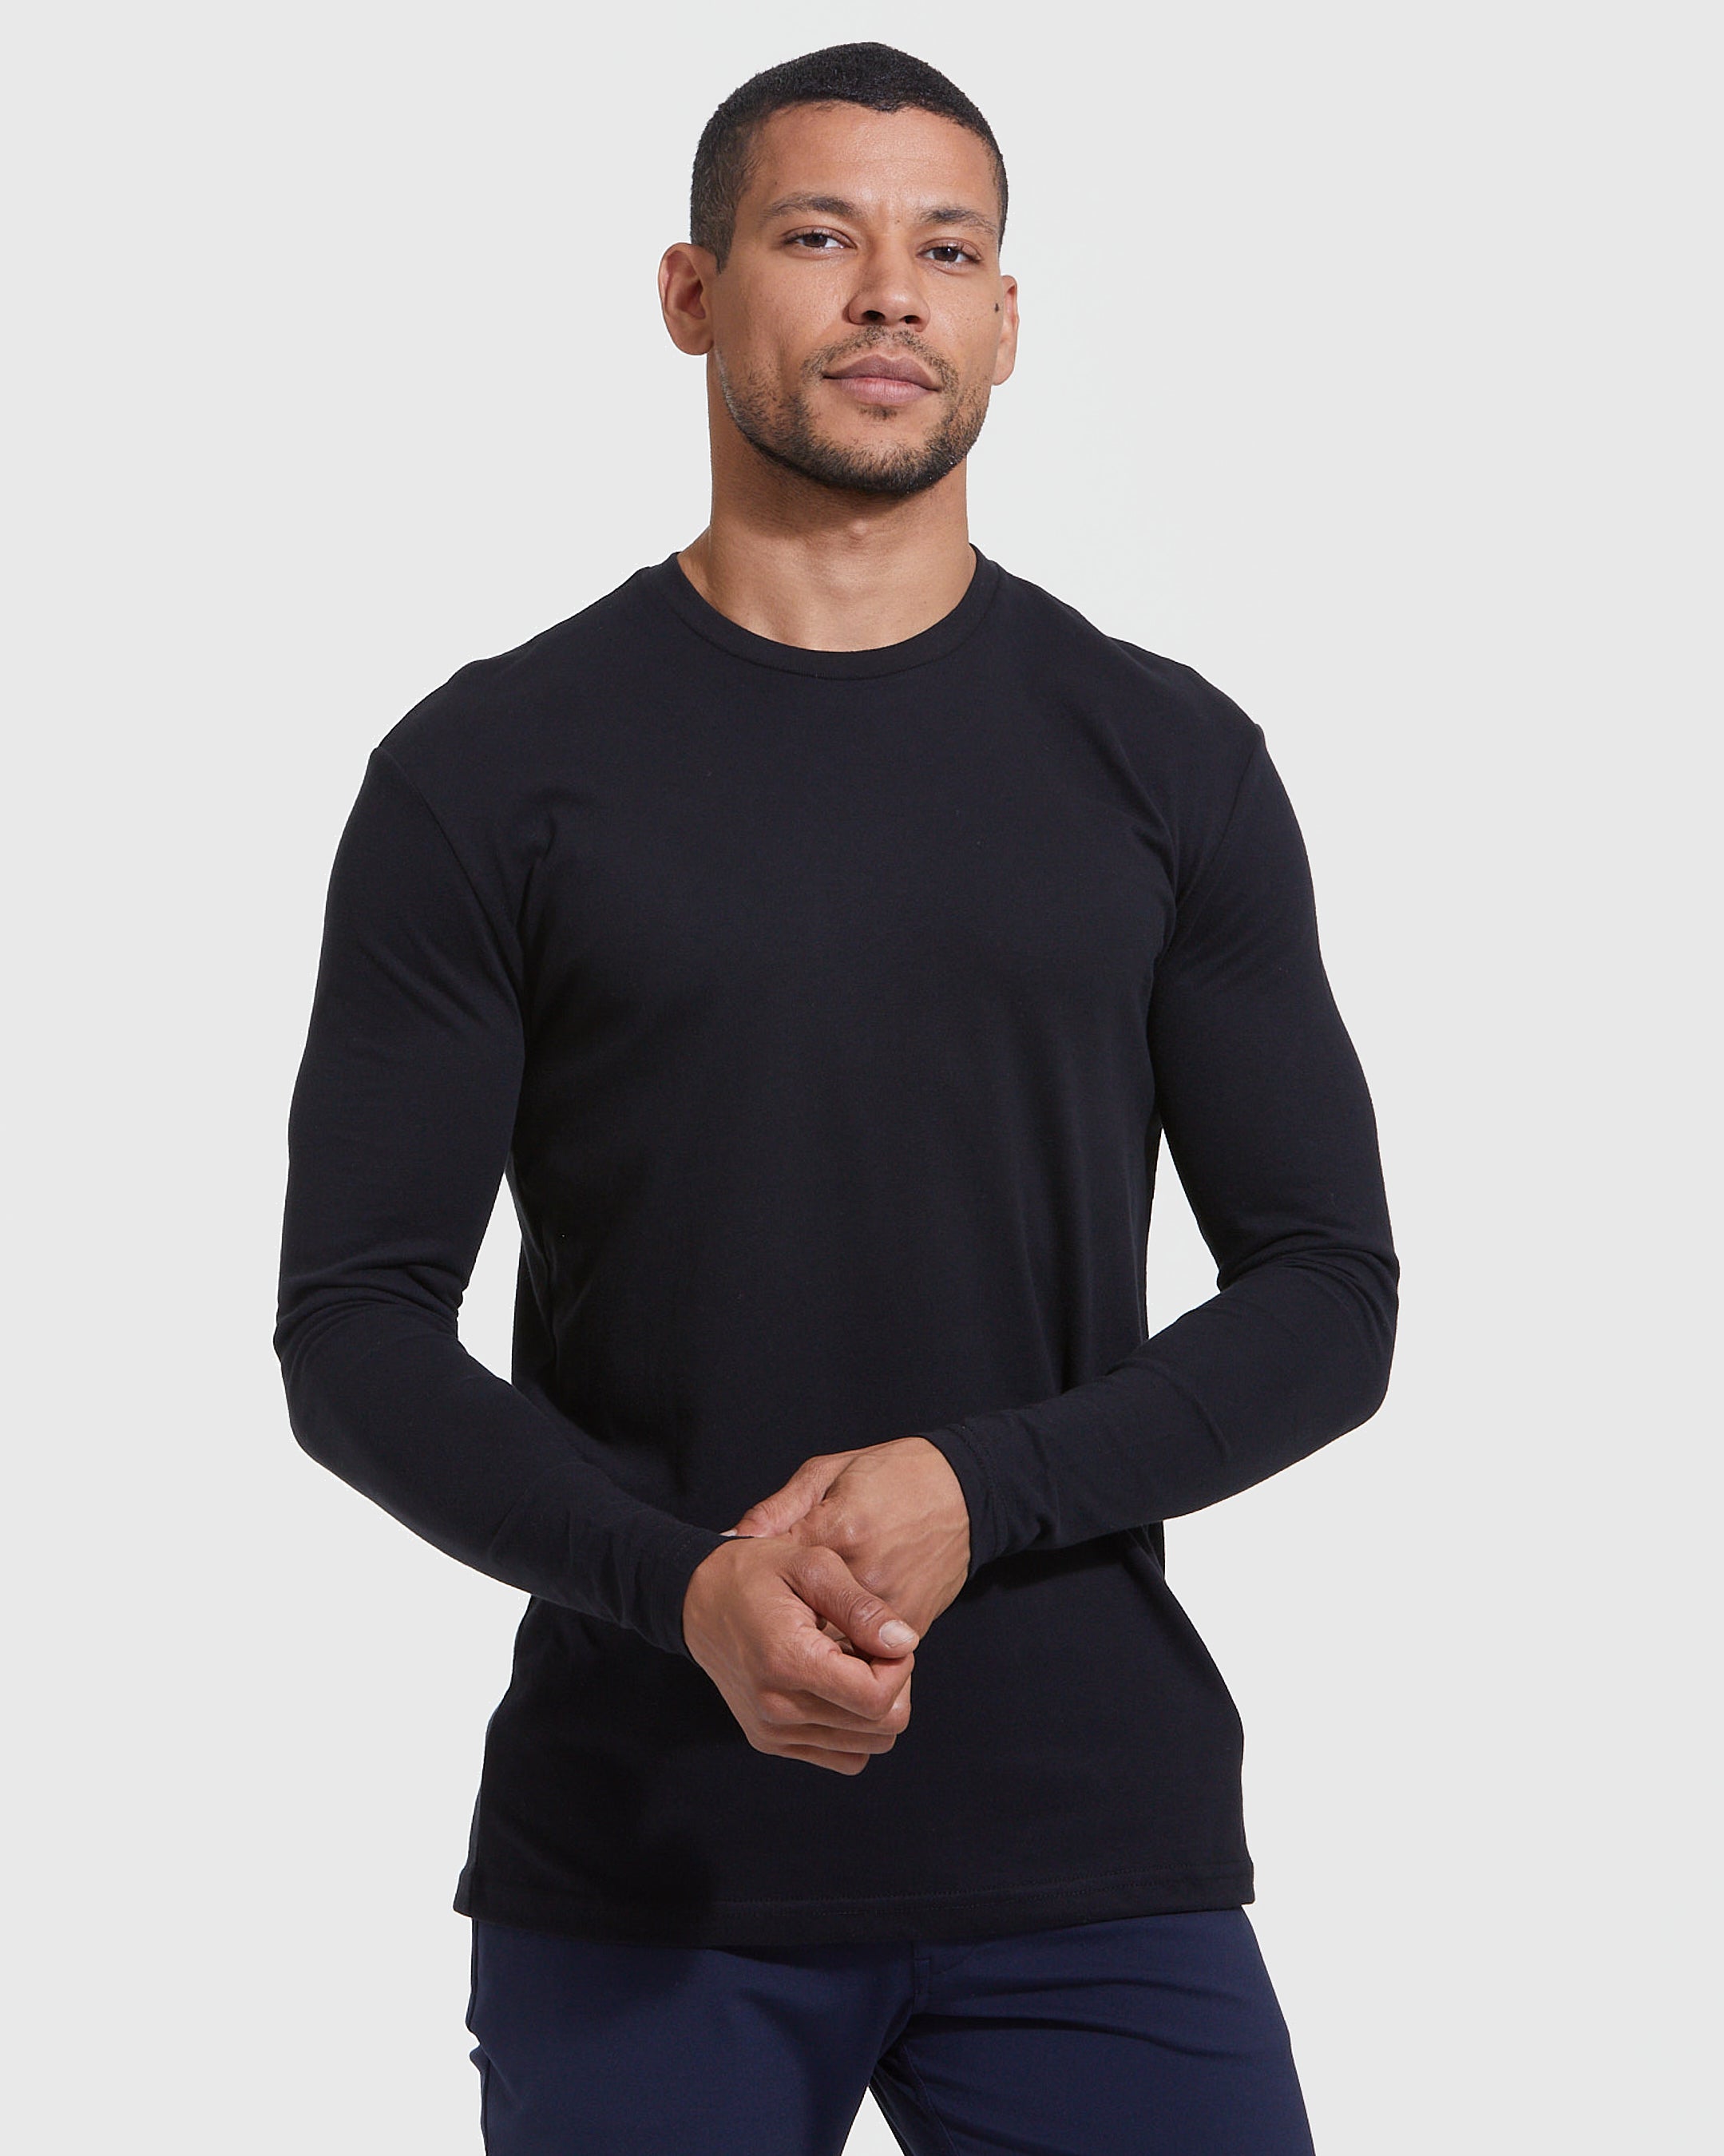 True Classic Long Sleeve Crew Shirt for Men. Premium Fitted Mens